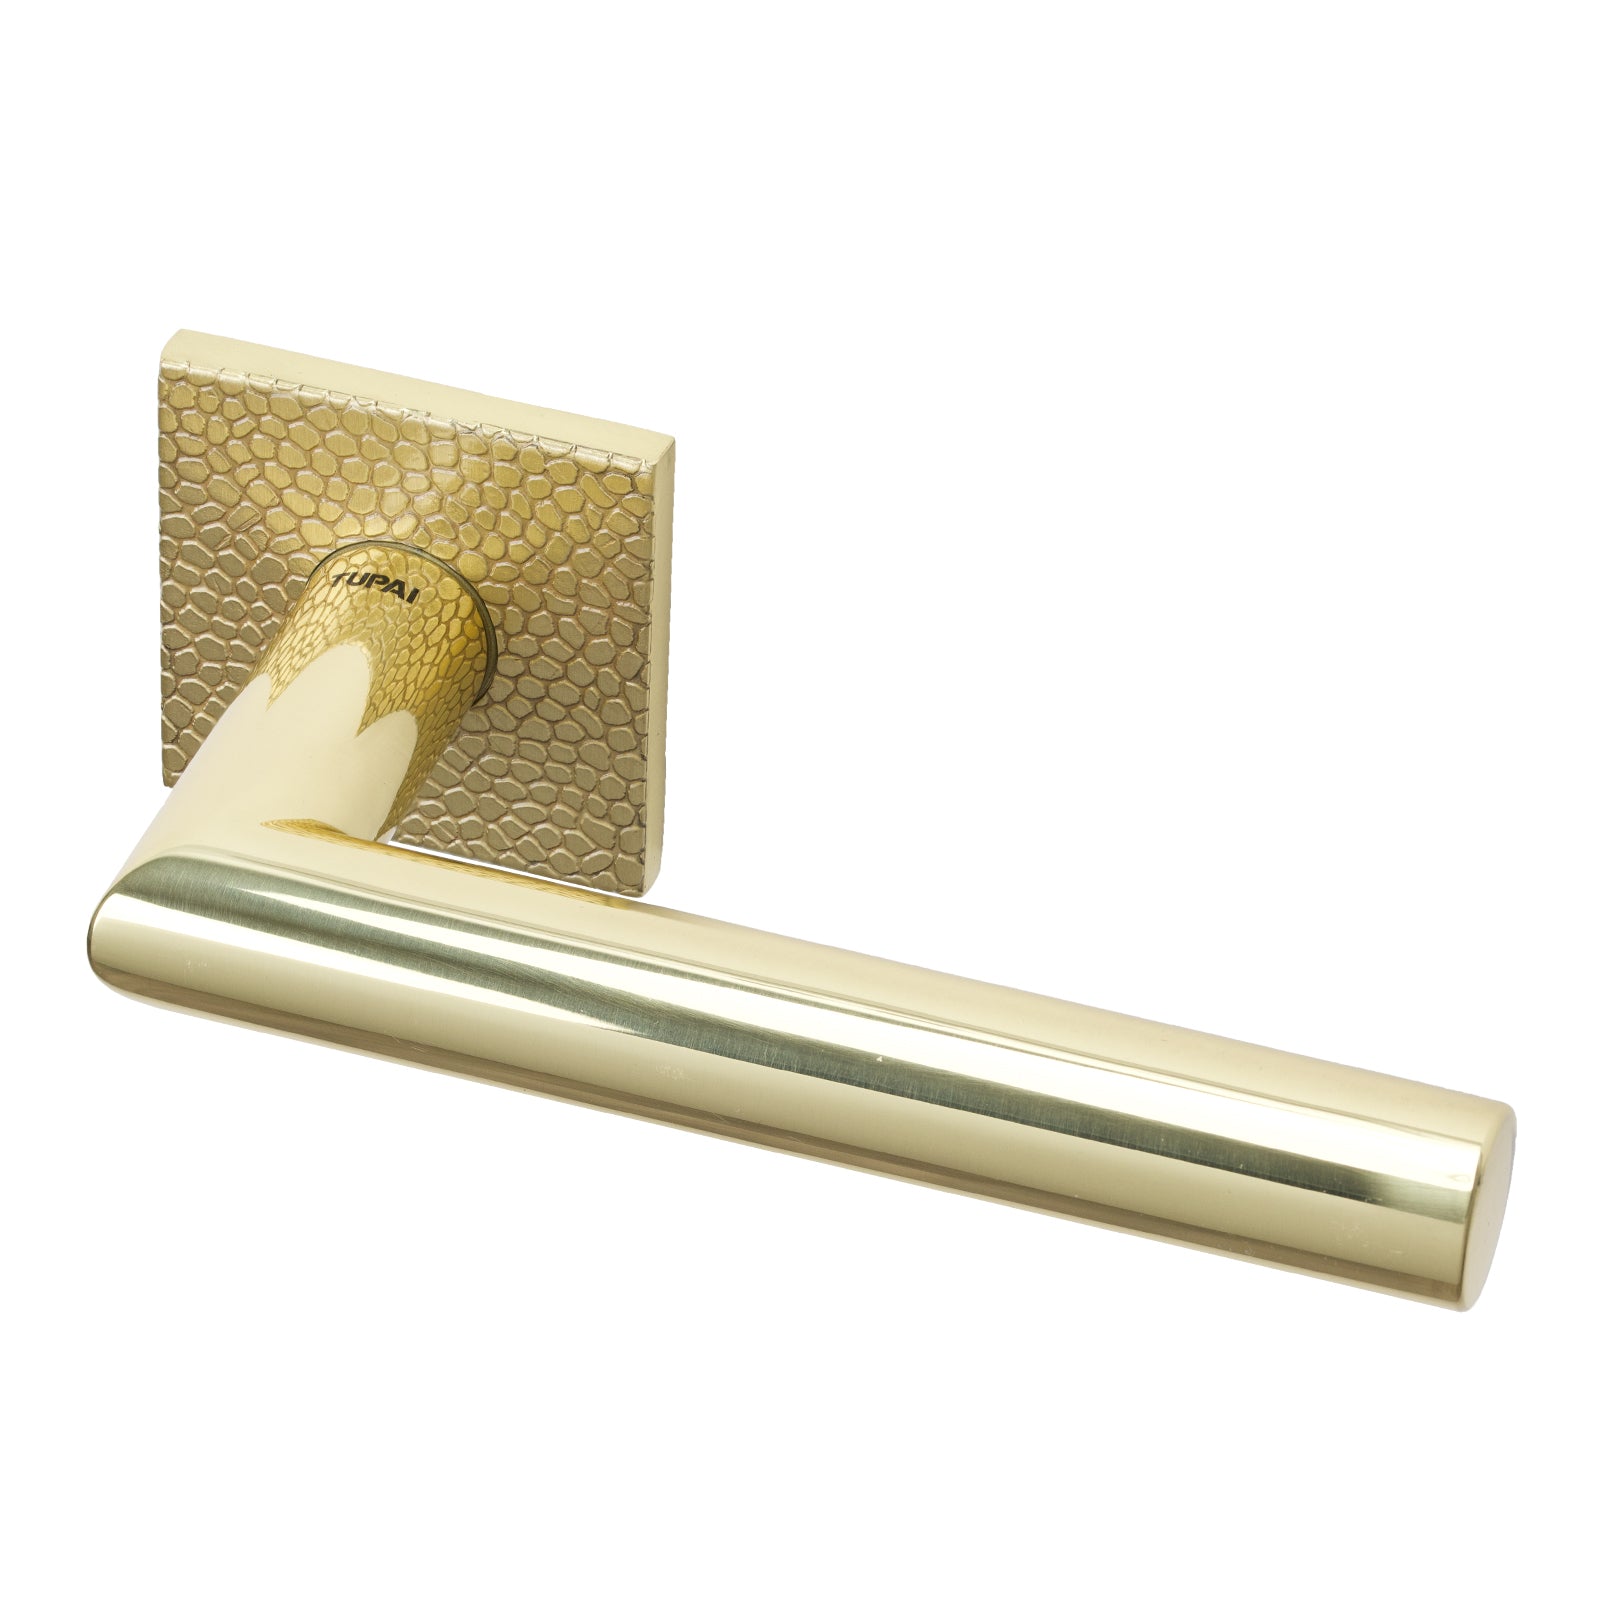 Larouco Pebbles Texture Lever on Rose Door Handle in Polished Brass Finish SHOW